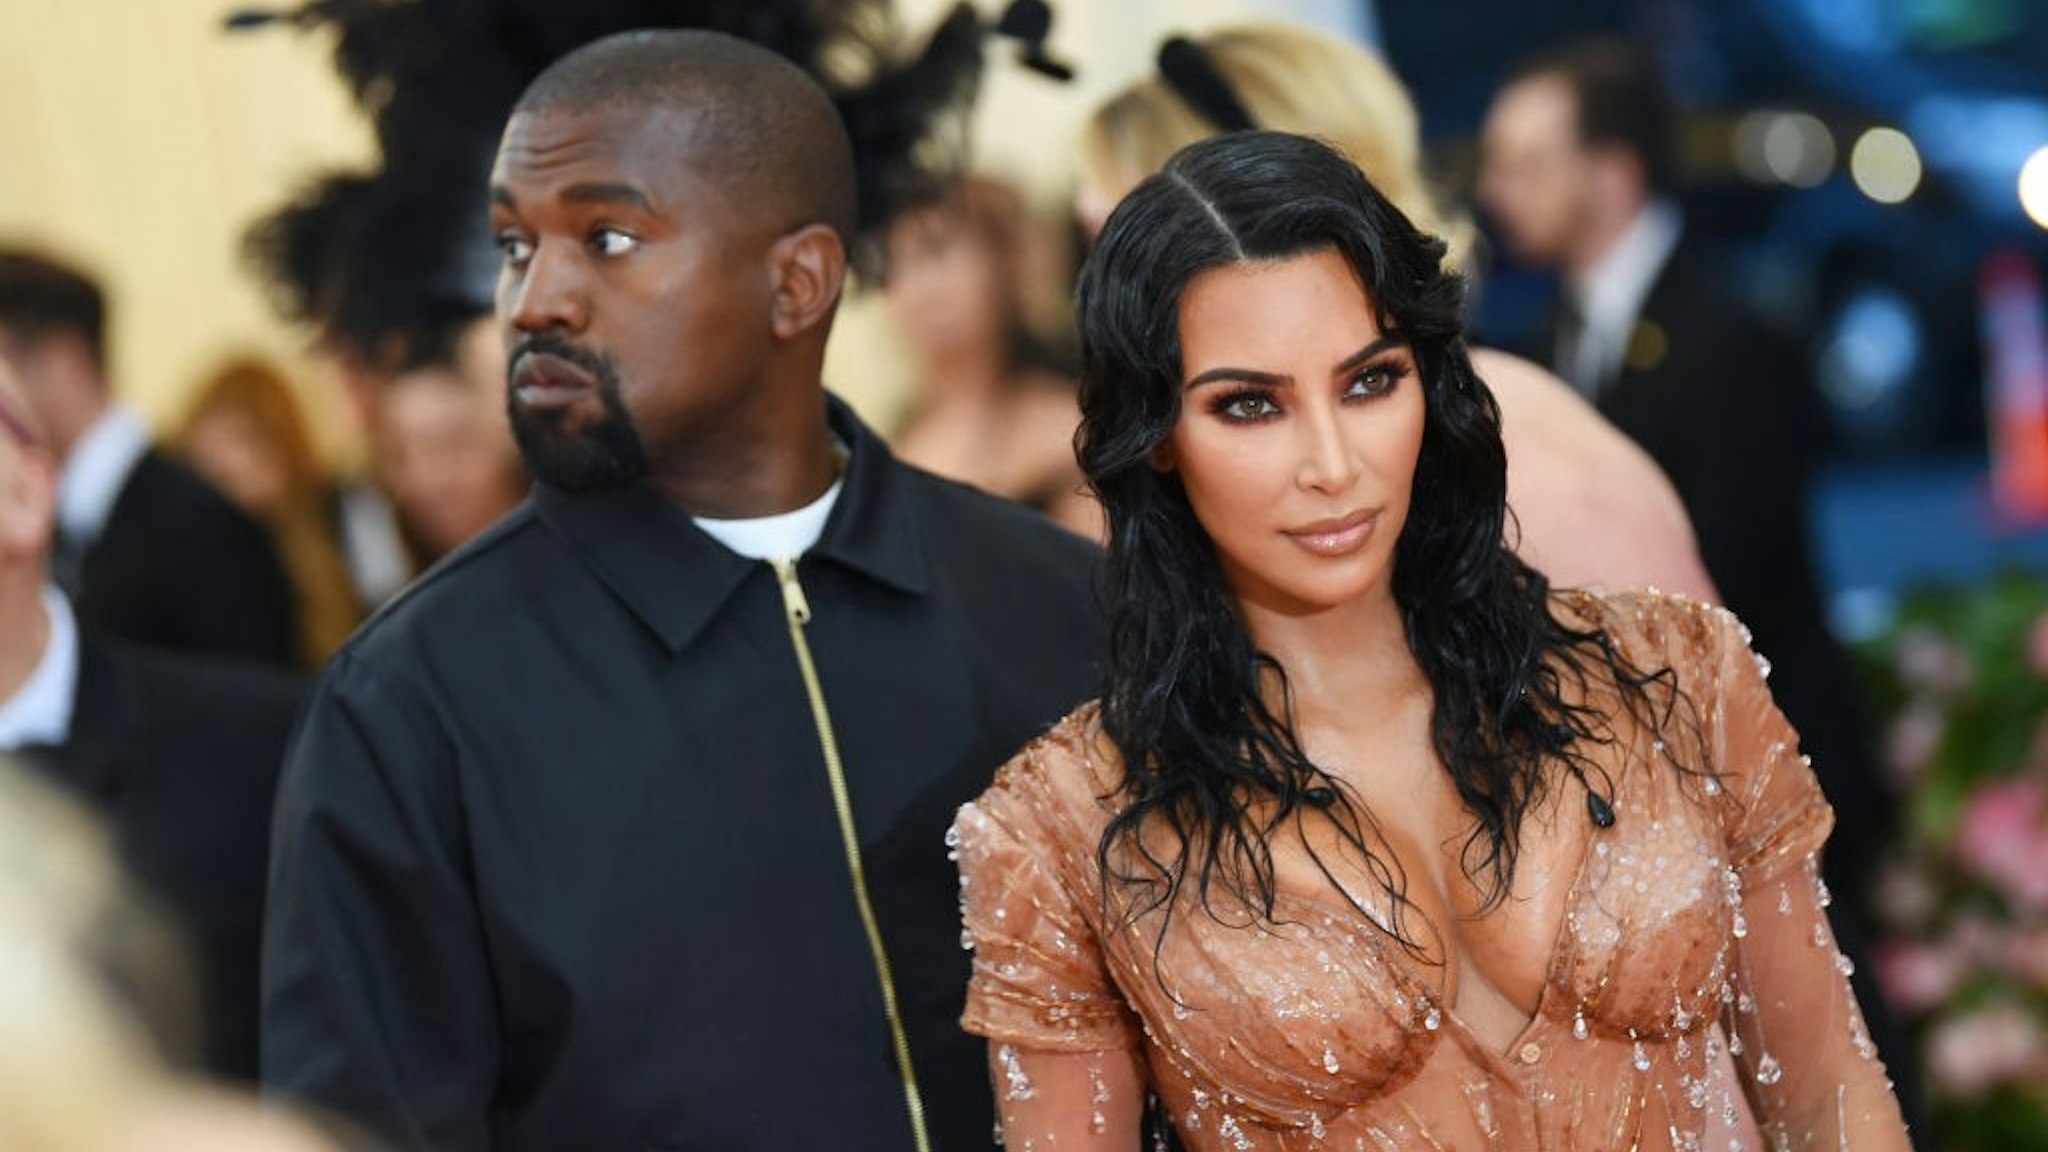 Kim Kardashian West and Kanye West attend The 2019 Met Gala Celebrating Camp: Notes on Fashion at Metropolitan Museum of Art on May 06, 2019 in New York City.